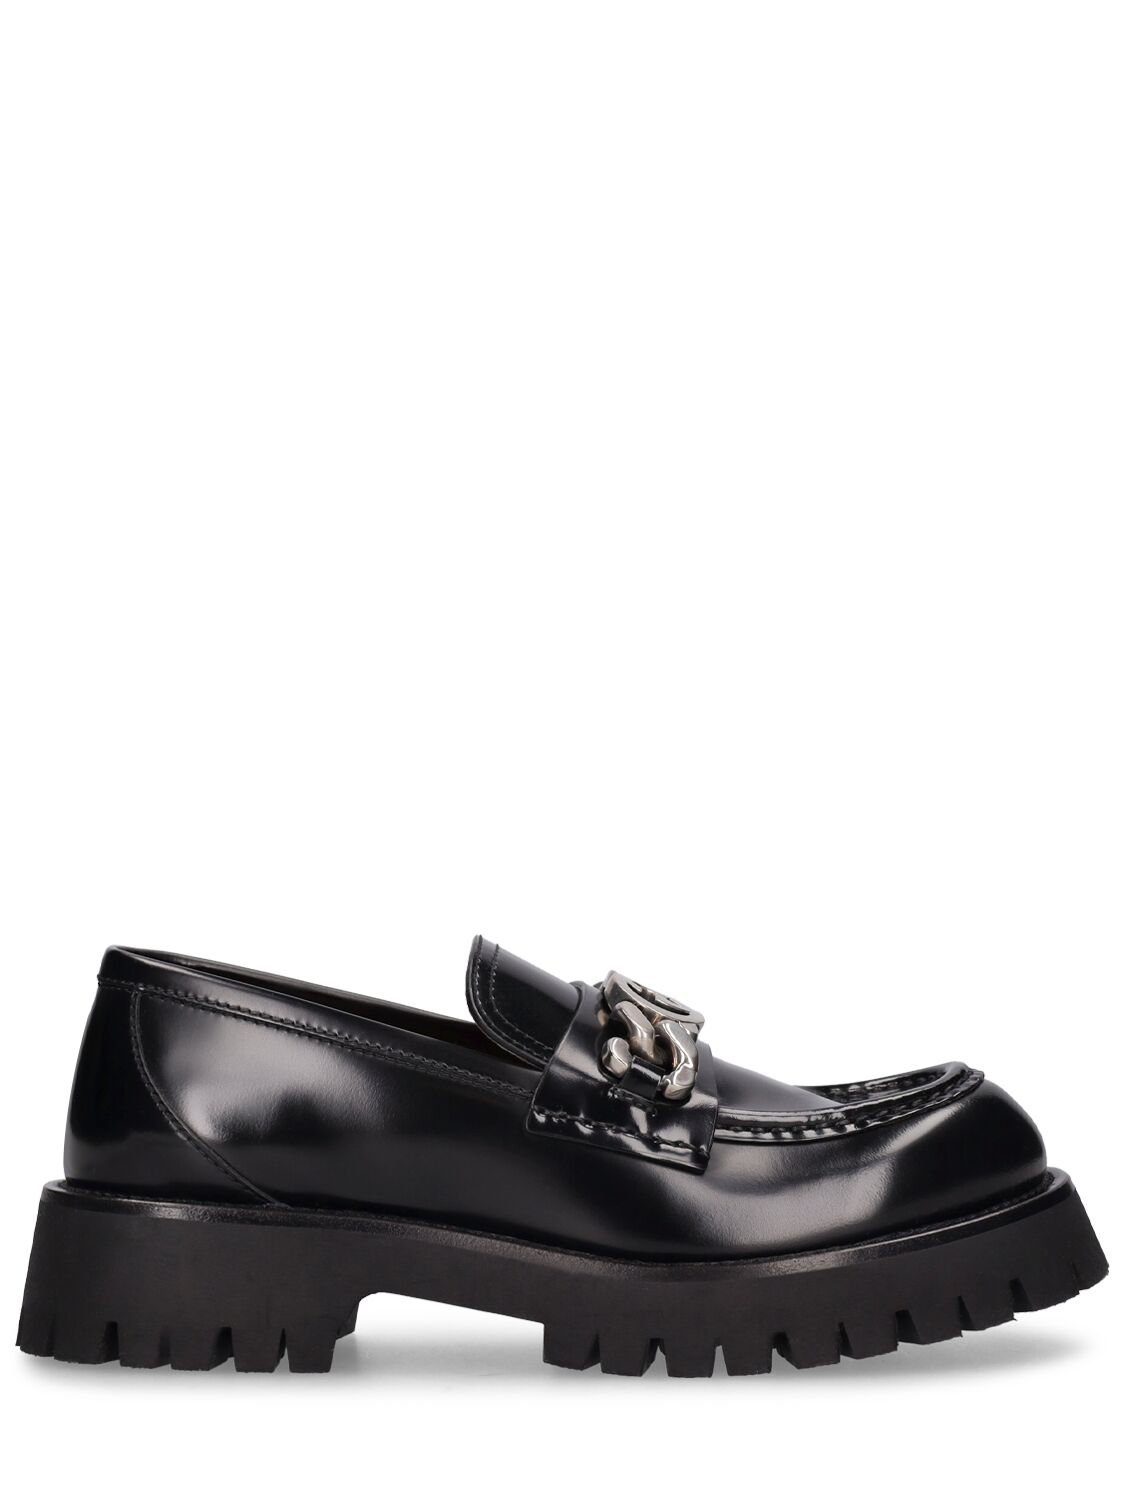 GUCCI 40MM LEATHER LUG SOLE LOAFERS